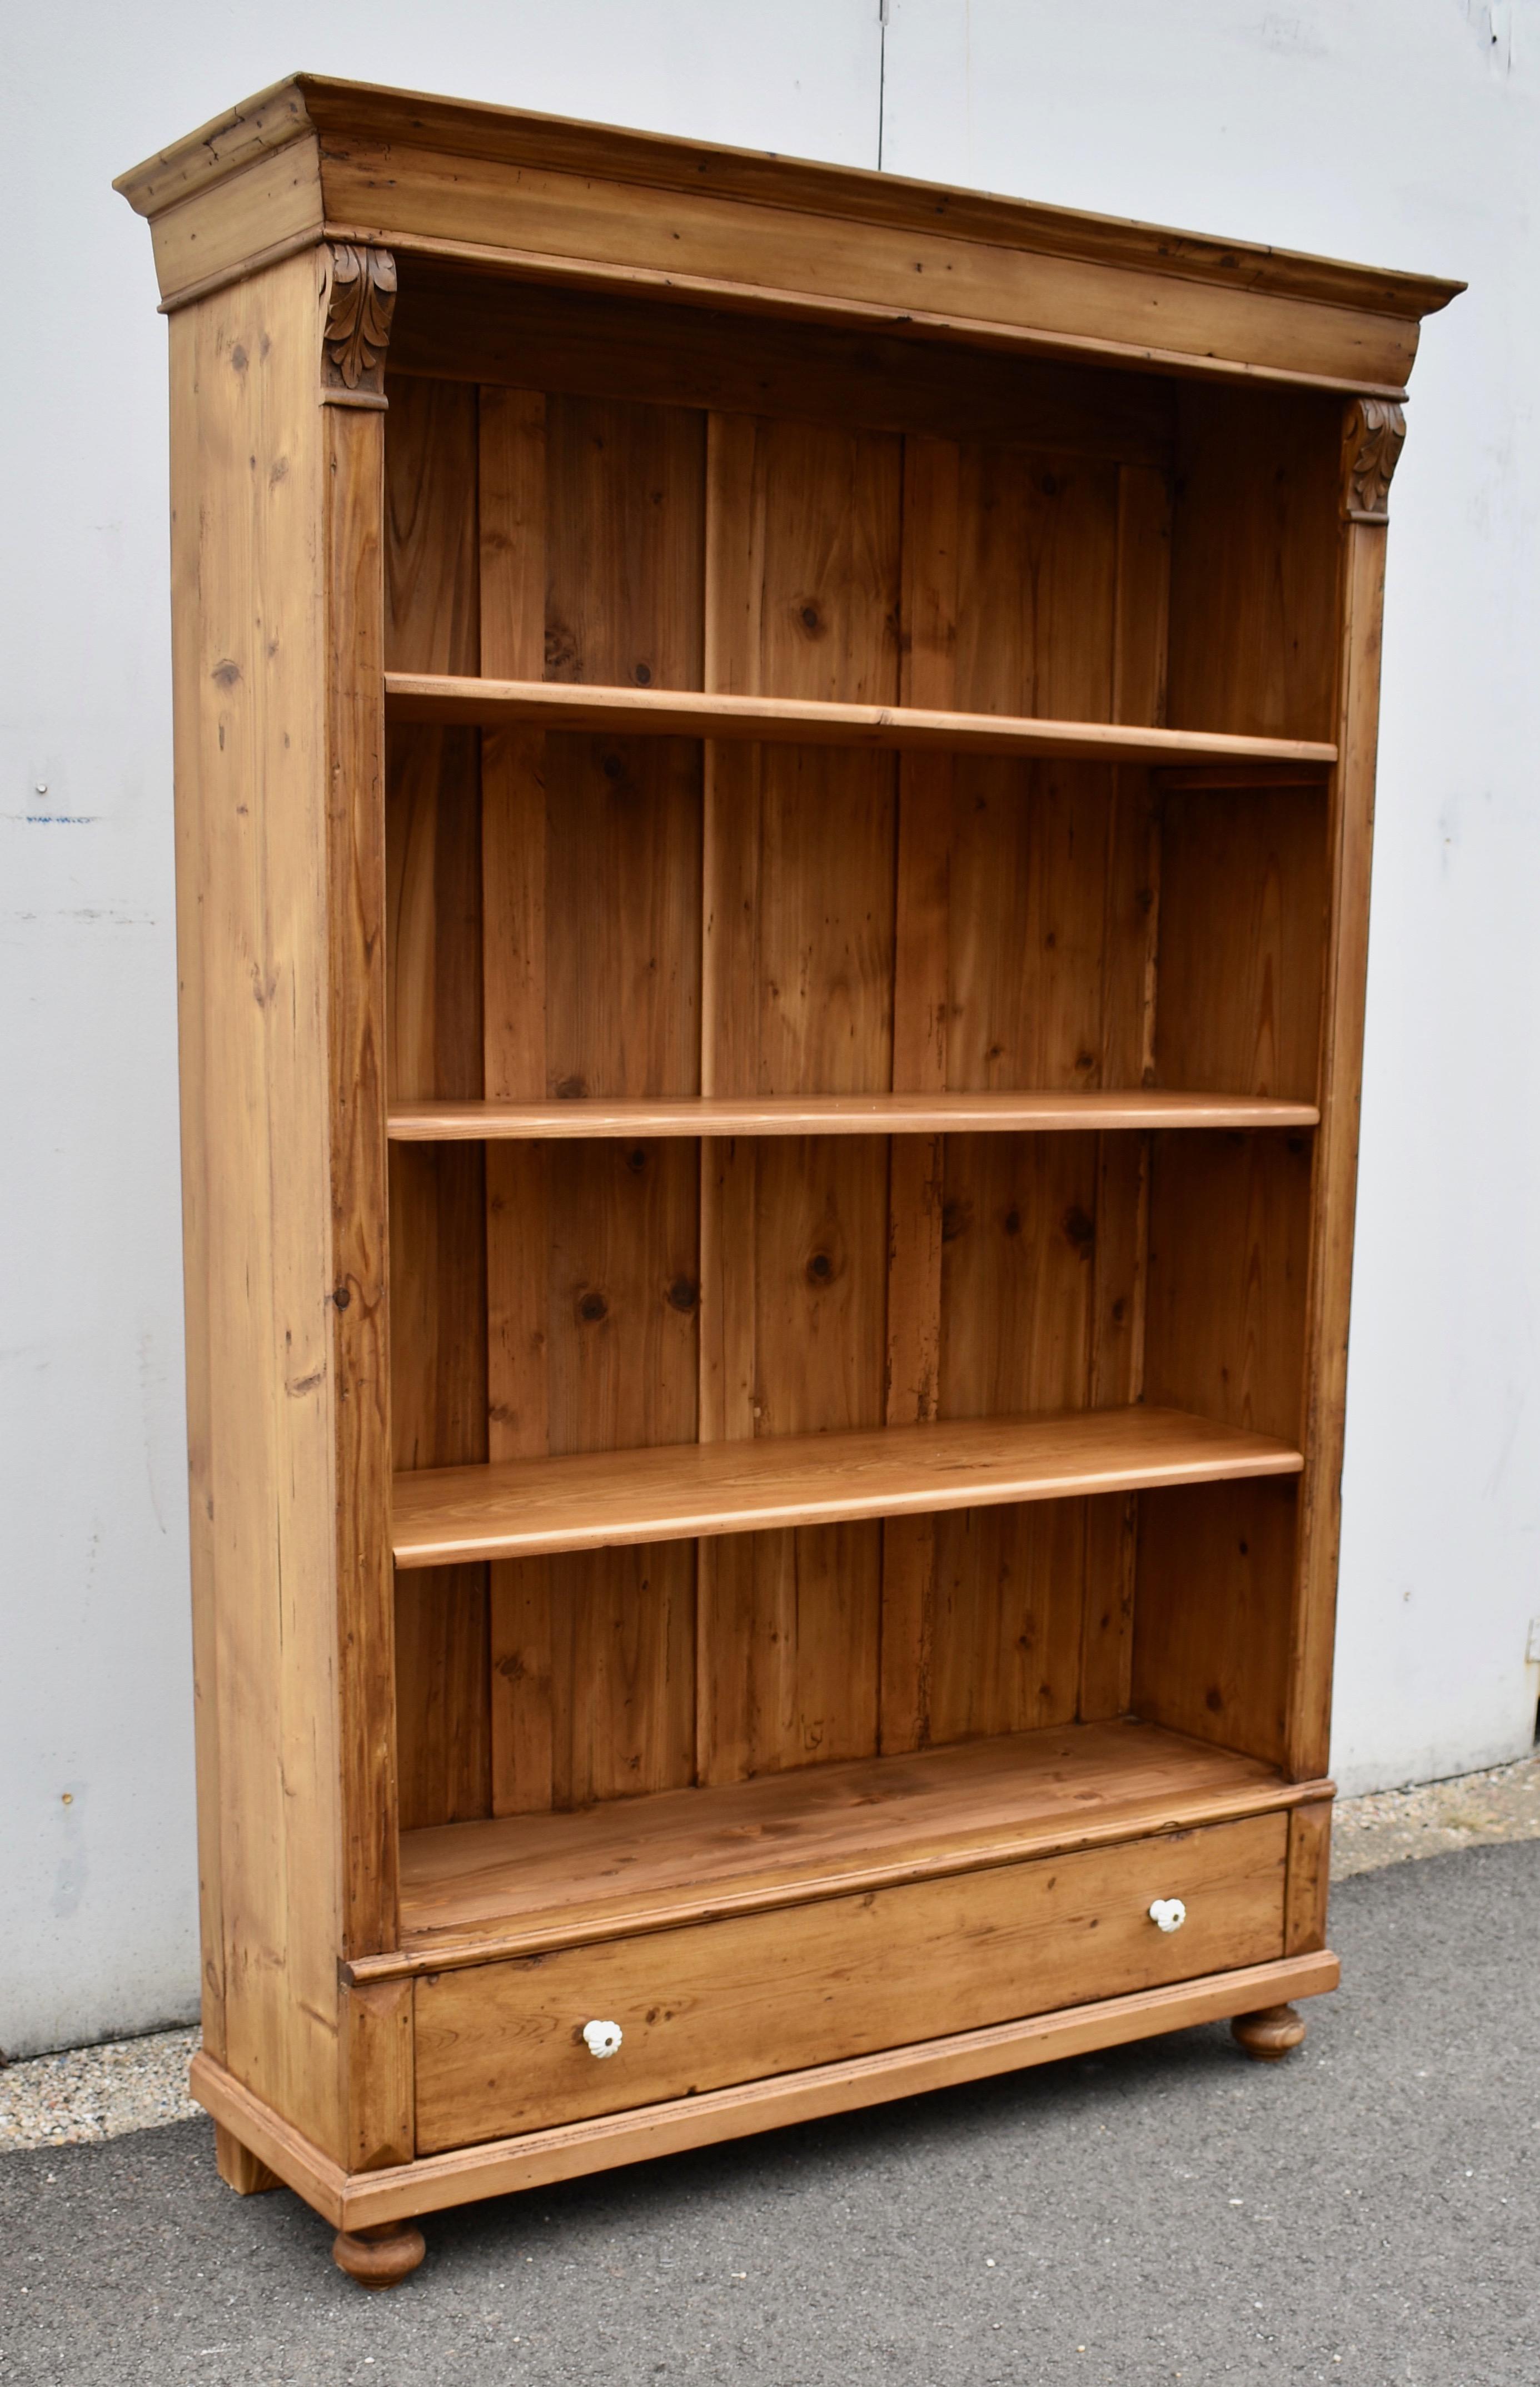 Polished Vintage Pine Open Bookcase from Armoire